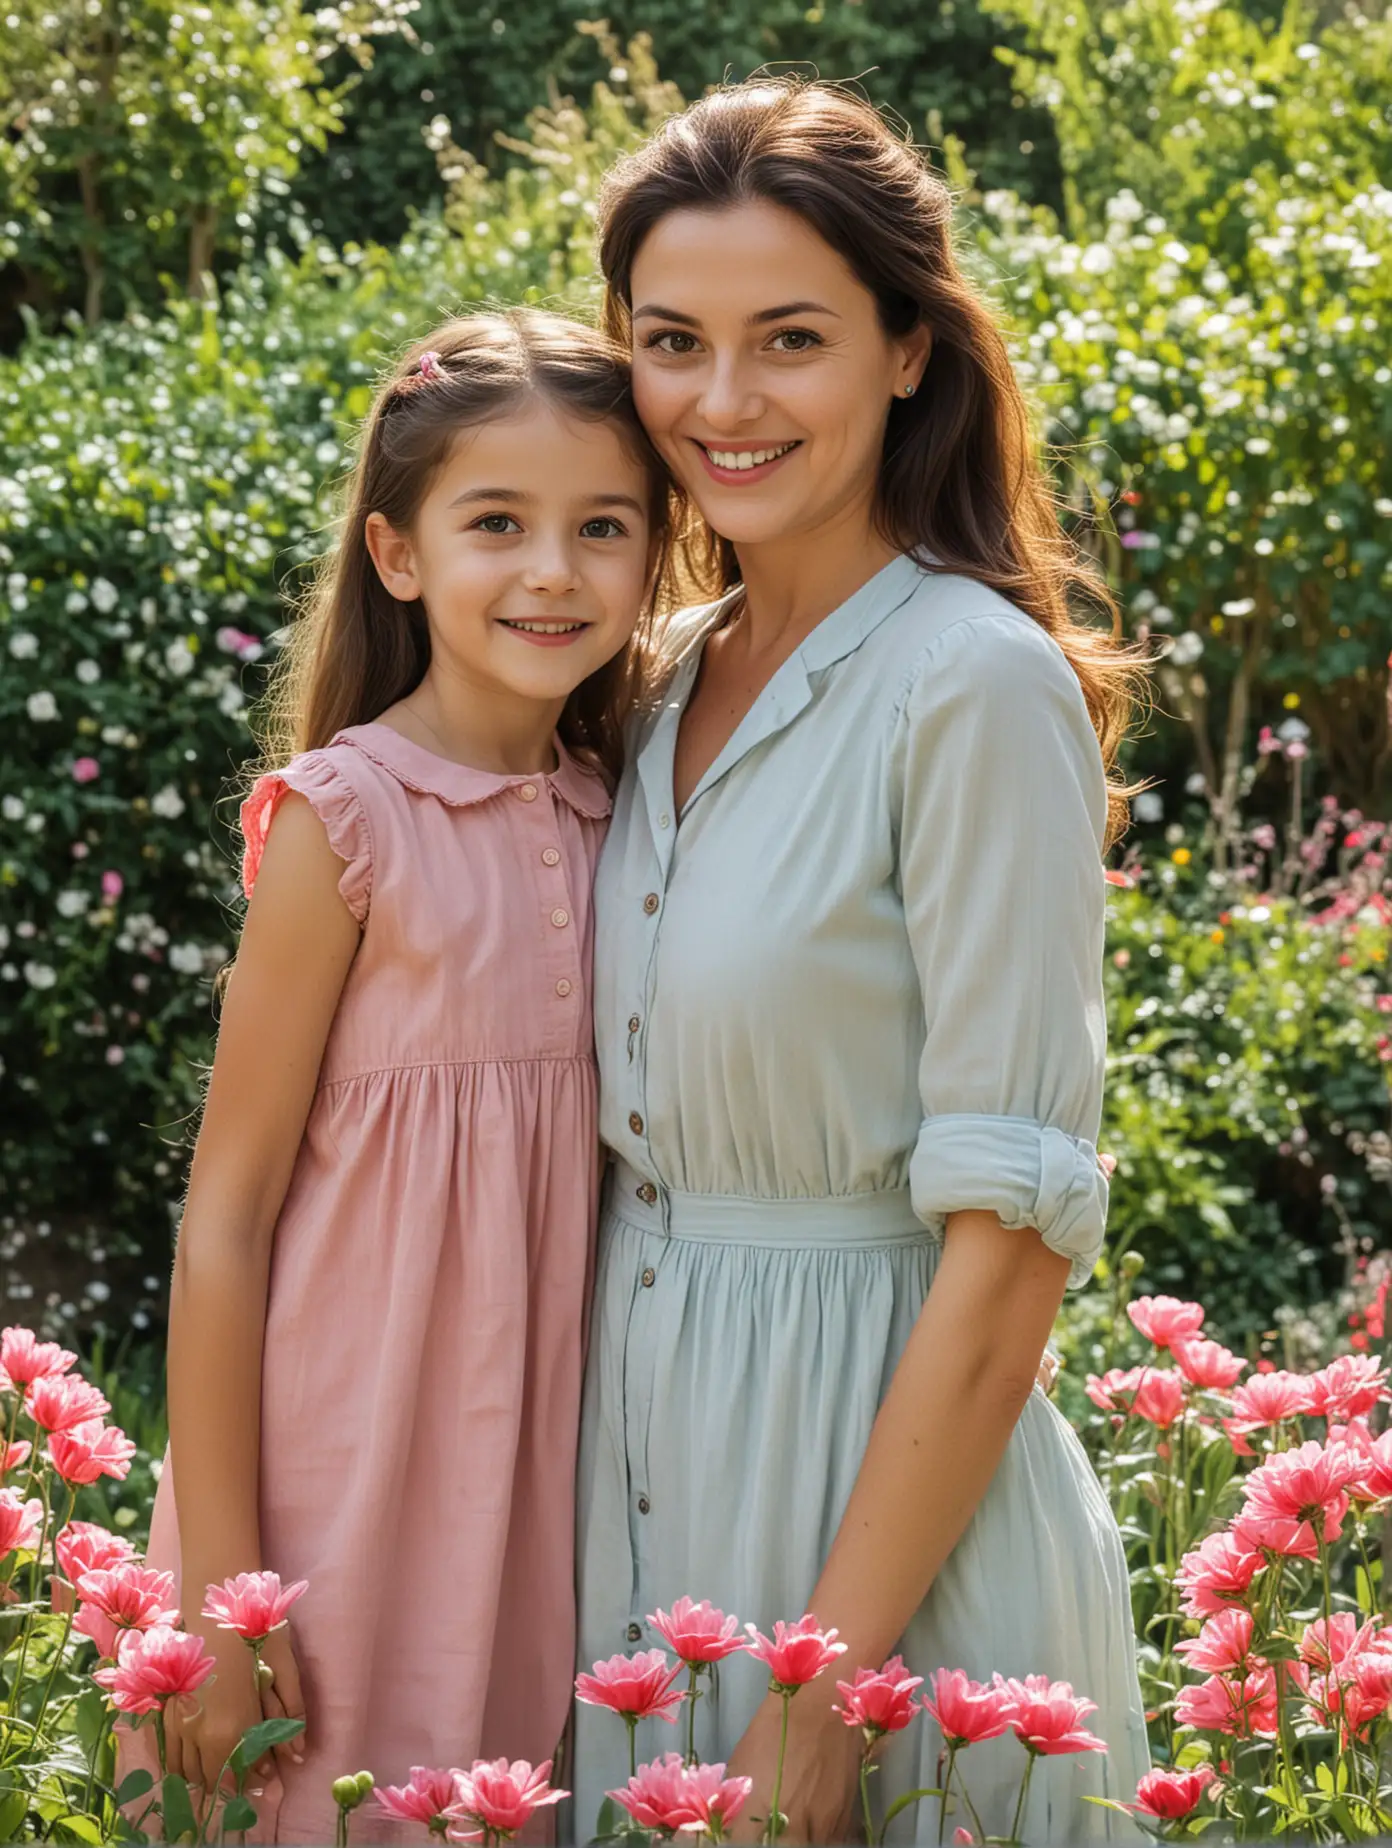 At this moment of Mother's Day, the mother and daughter stand in the beautiful garden and show happy smiles in front of the camera. The mother's eyes are full of love for the daughter, and the daughter's eyes are full of respect for the mother.